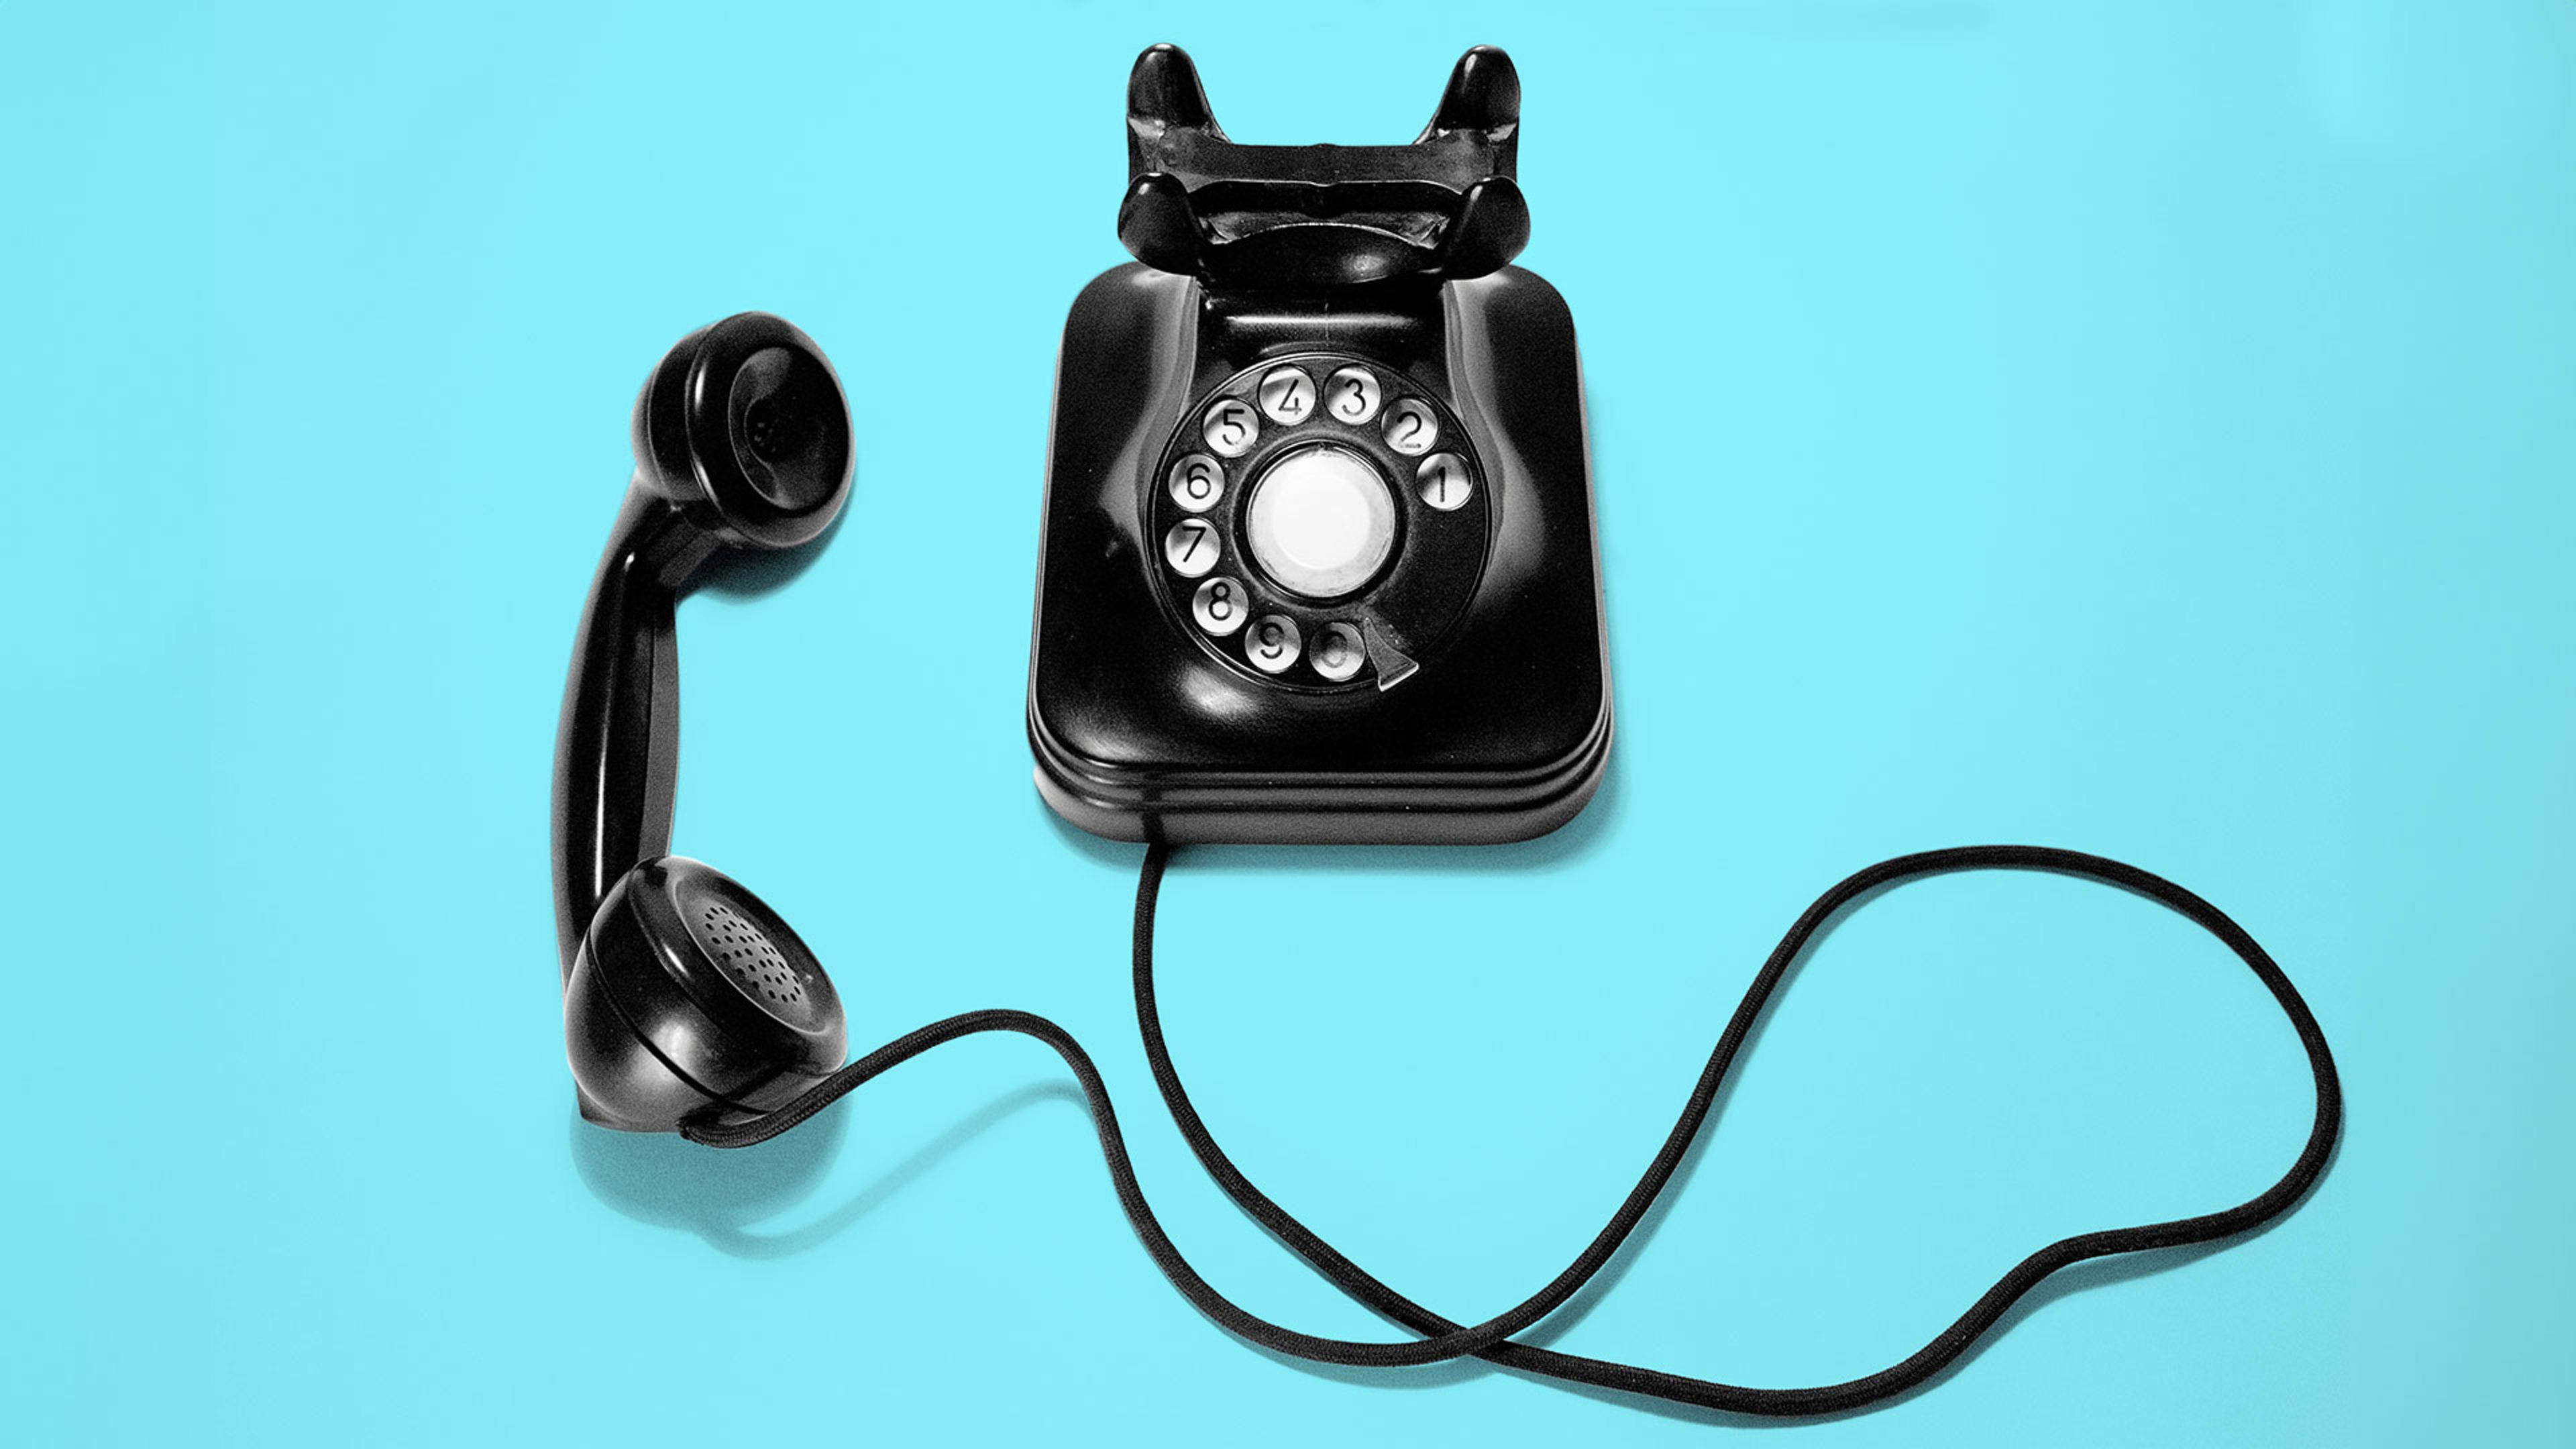 AT&T wants to kill landlines. Here’s what it means for places with bad cell service